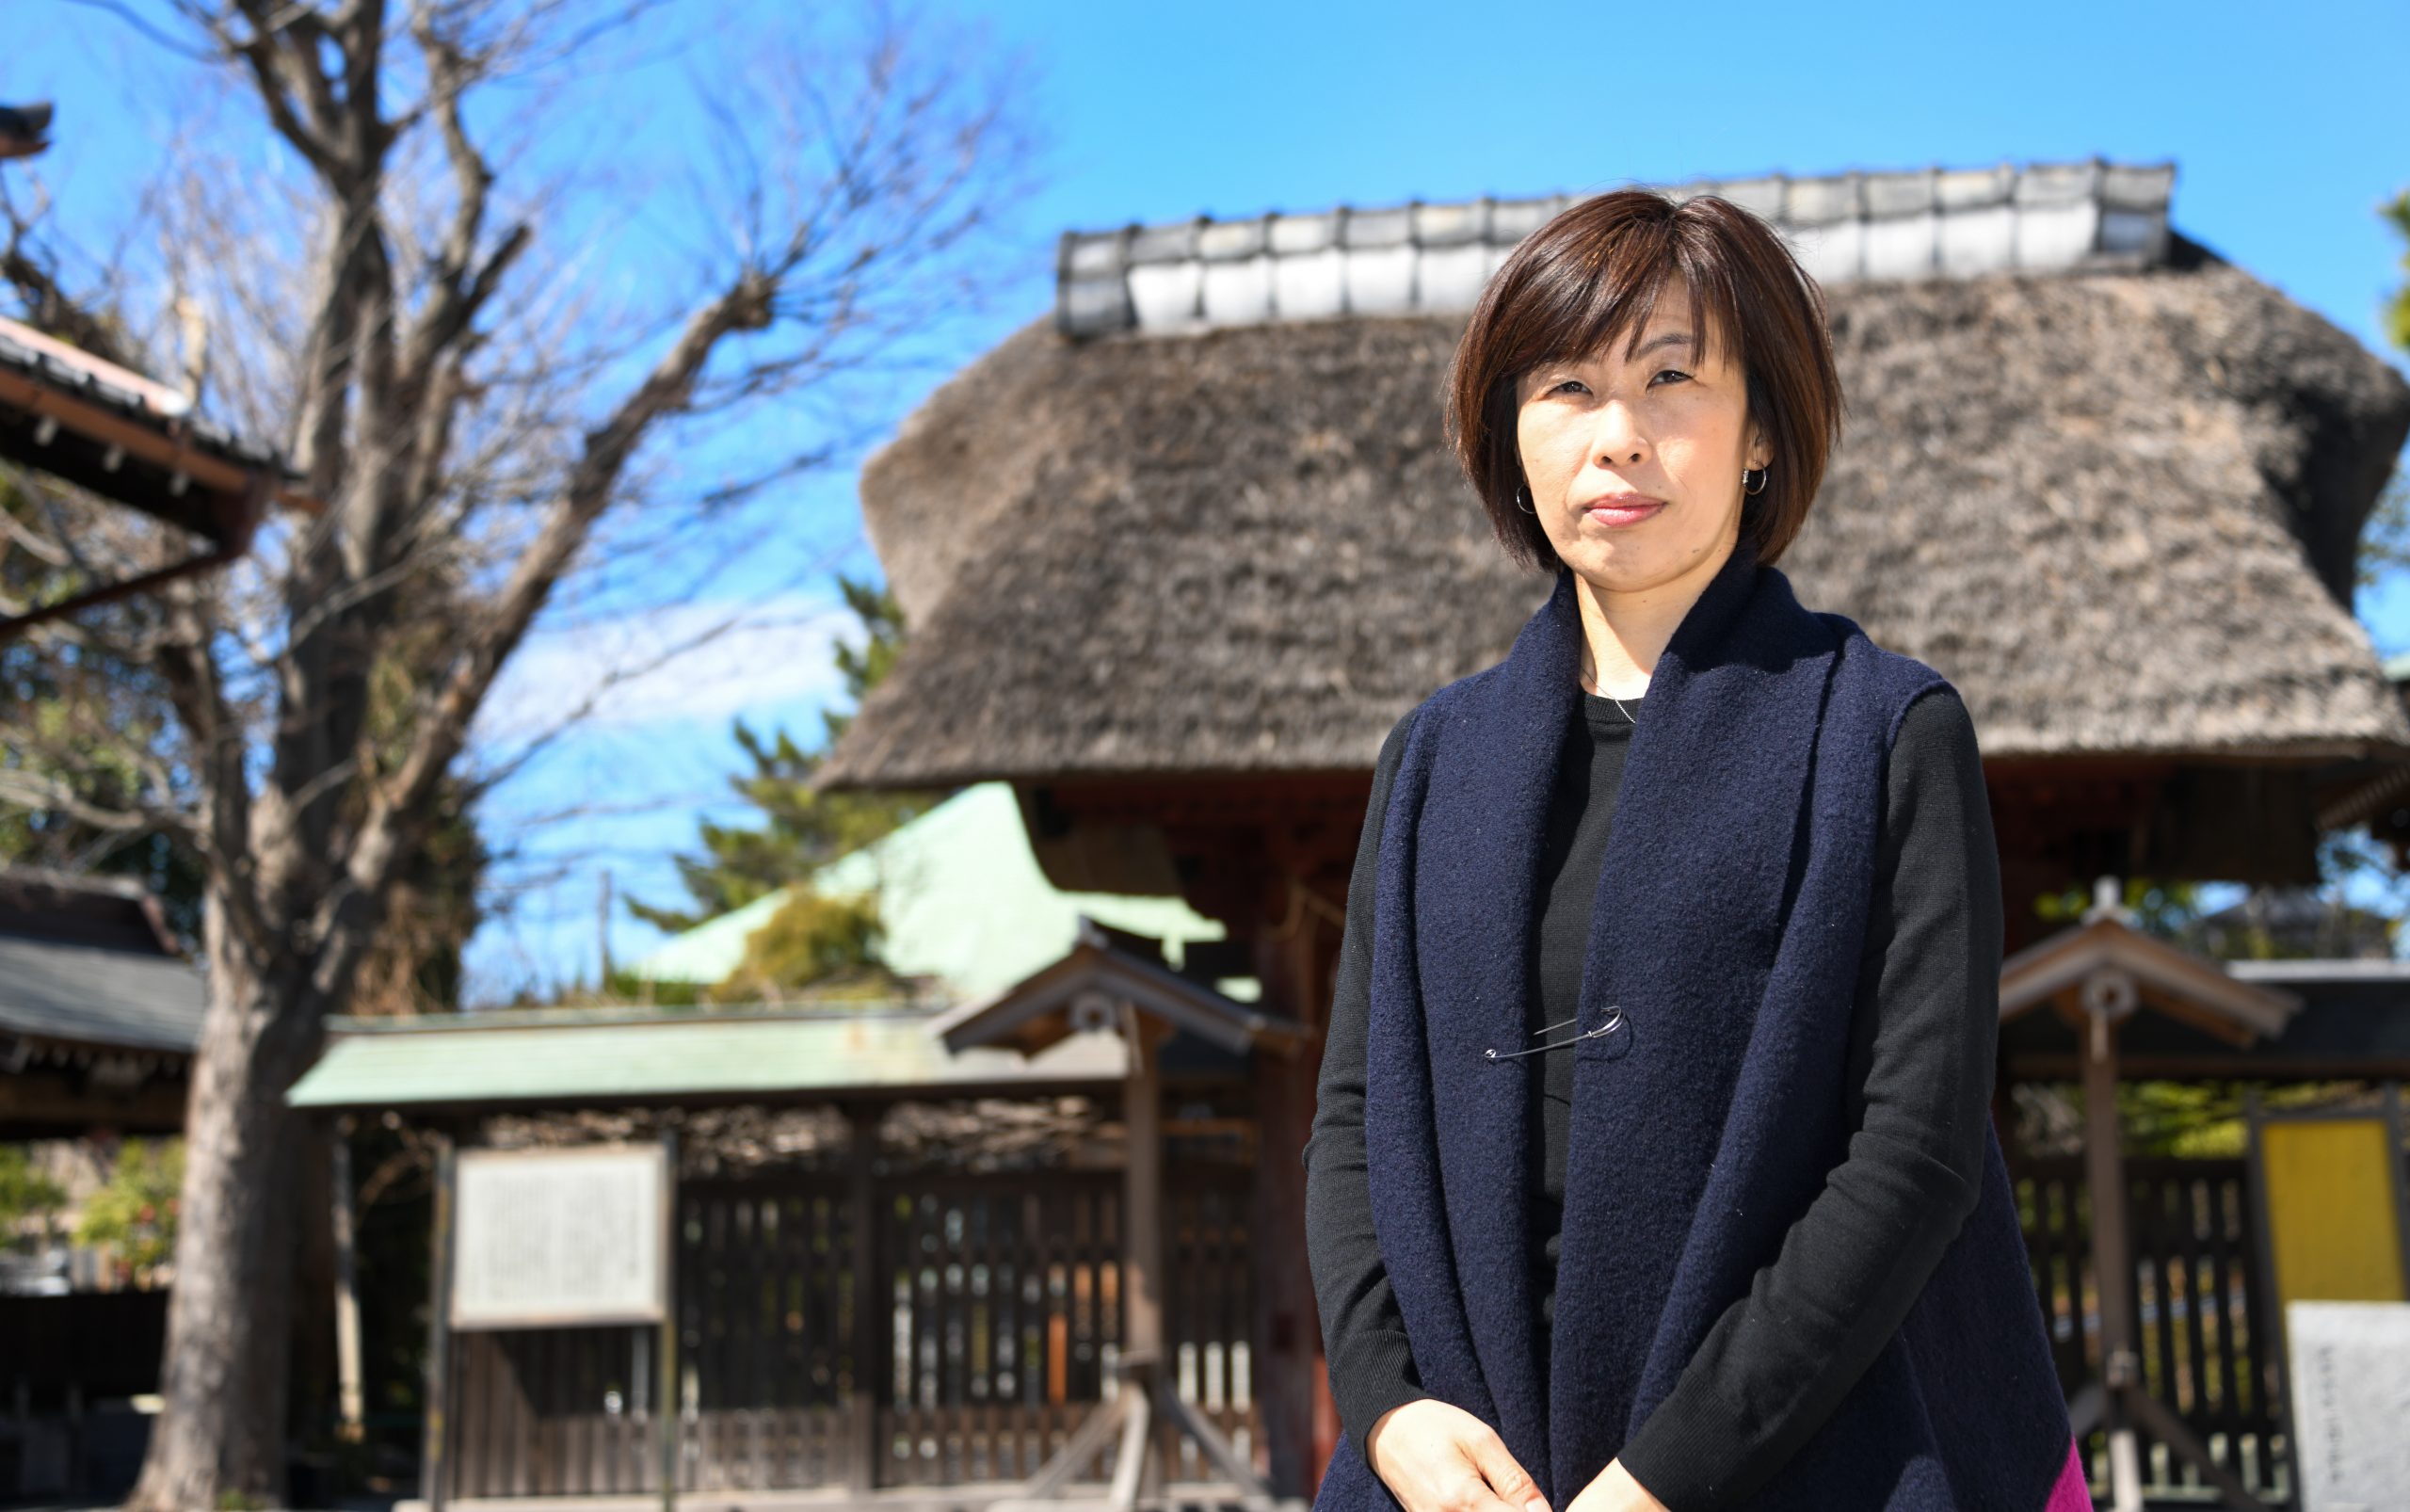 Anti Coal Power activist Kimiko Hirata standing outside on a sunny day in front a a building with a thatched roof and a tree whose leaves have fallen